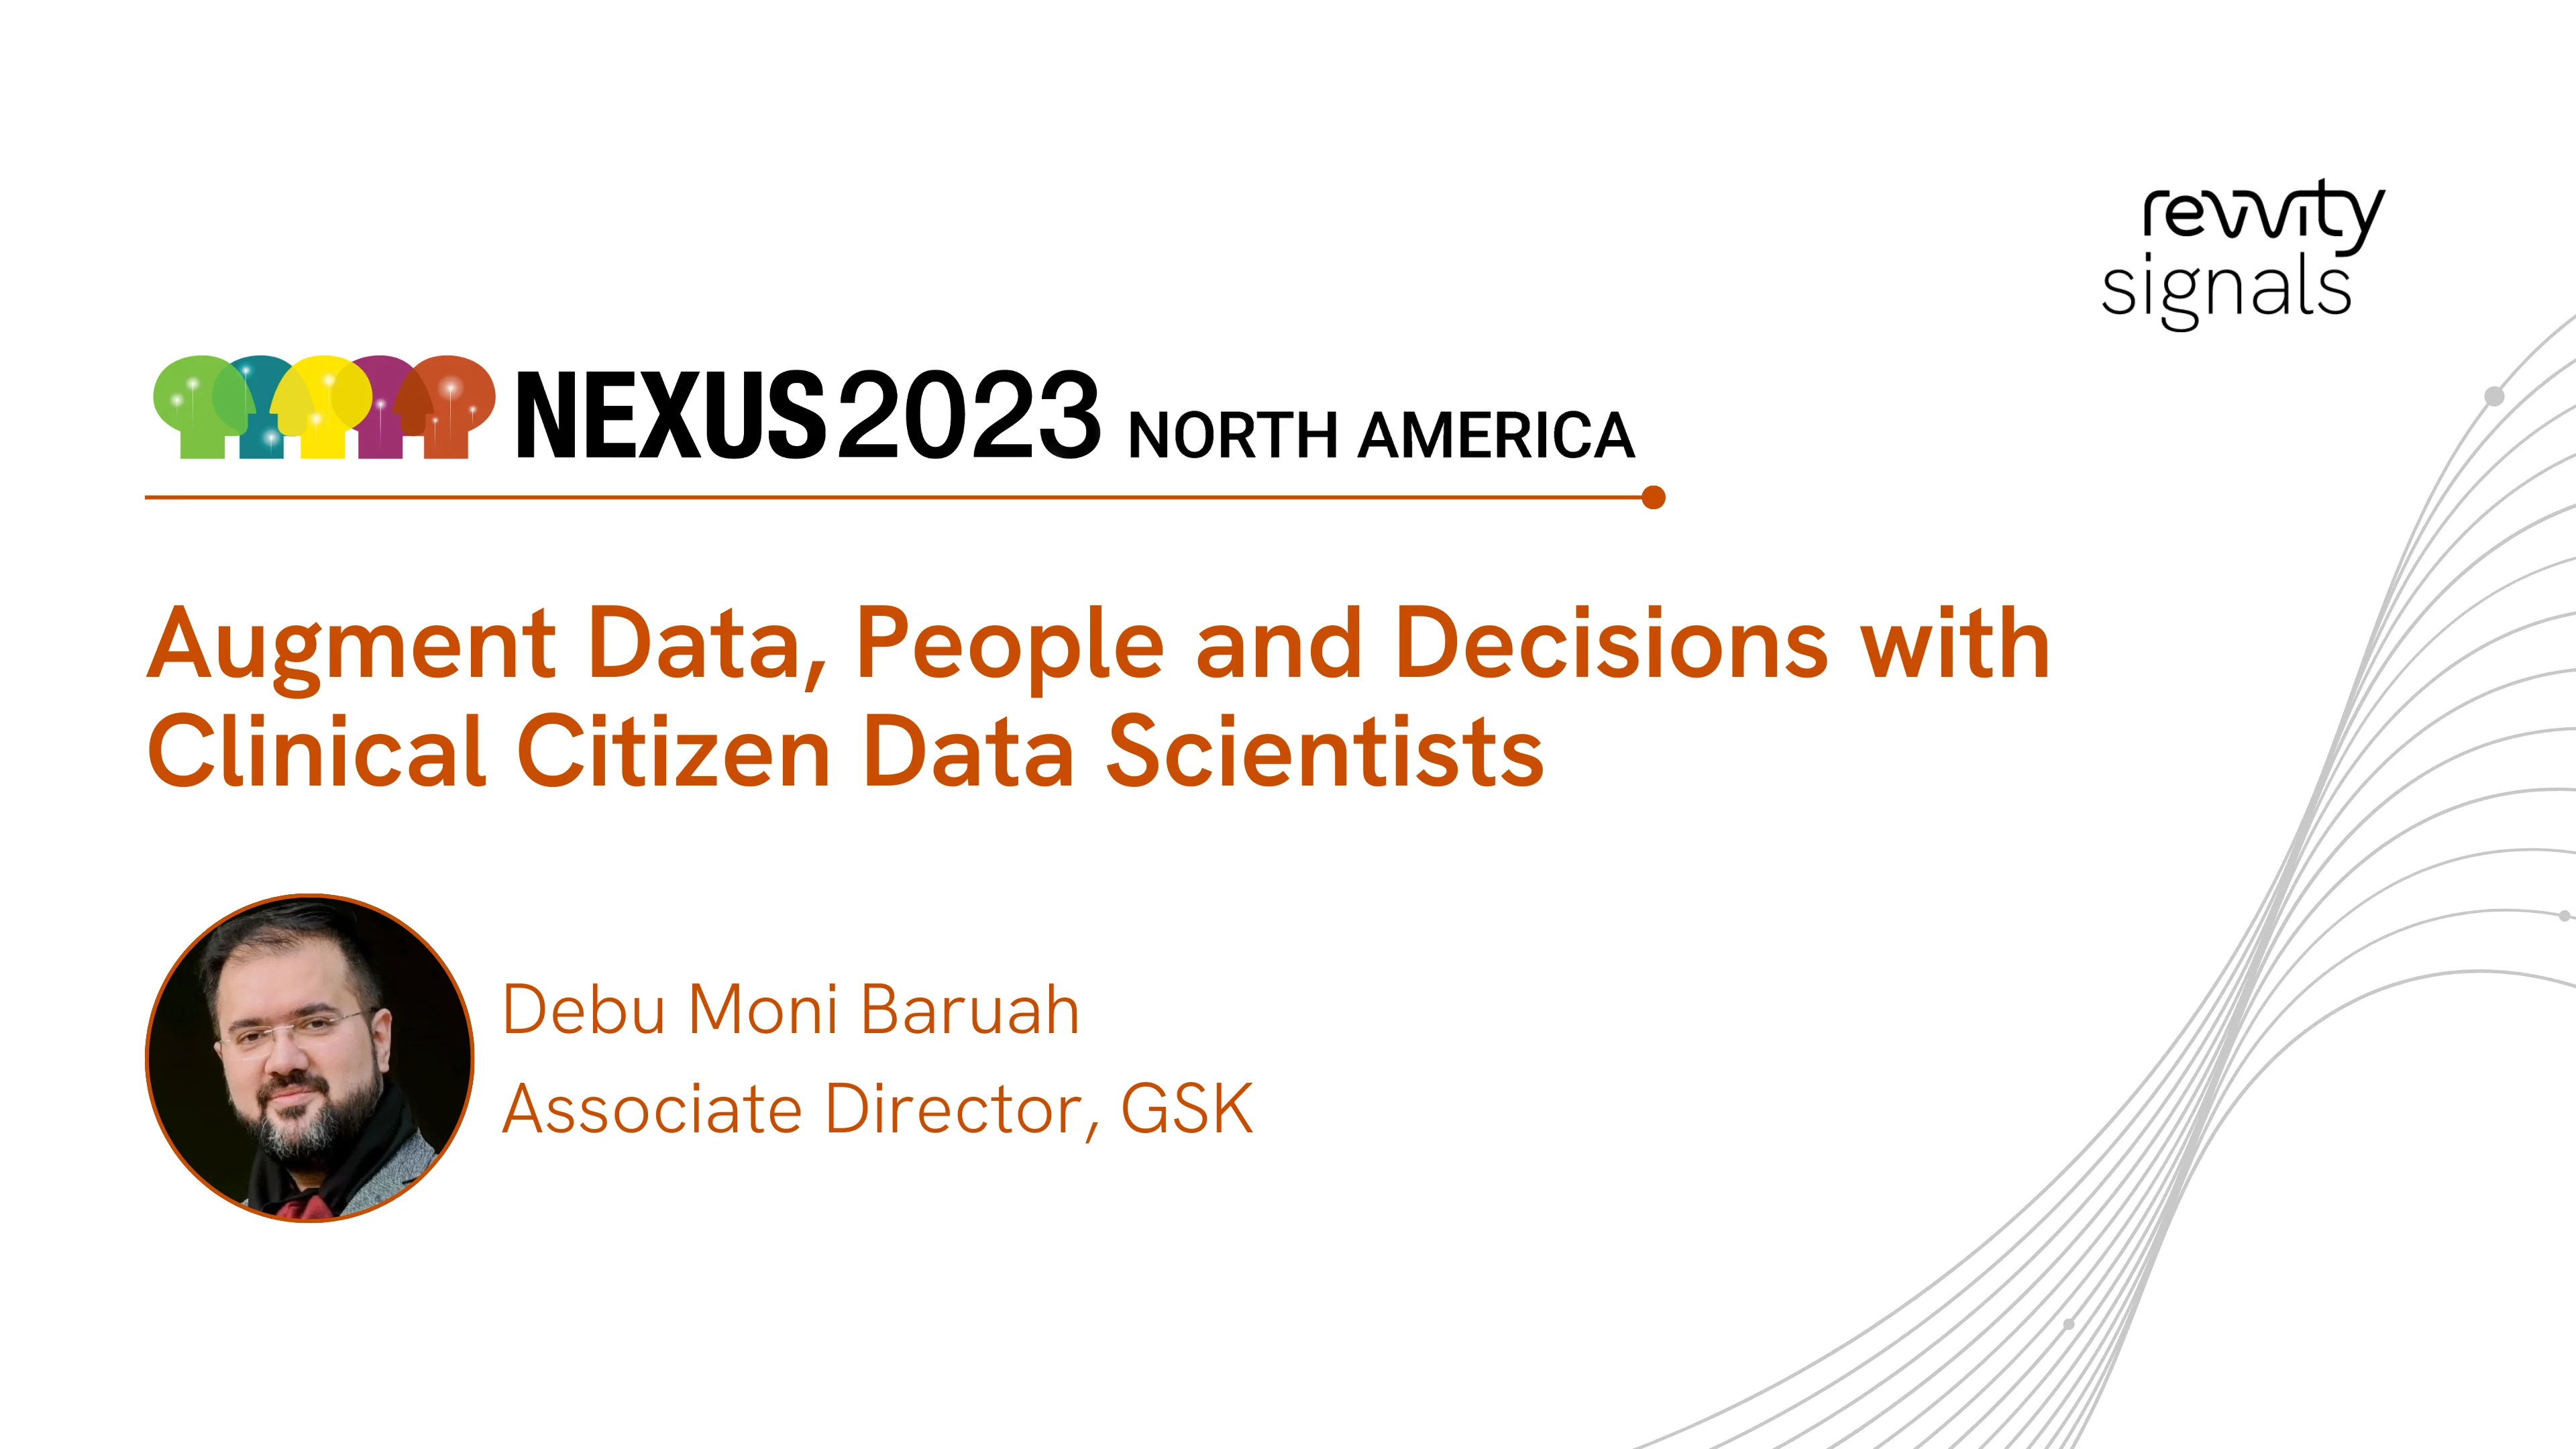 Watch Day 2, NA NEXUS 2023 - Augment Data, People and Decisions with Clinical Citizen Data Scientists on Vimeo.